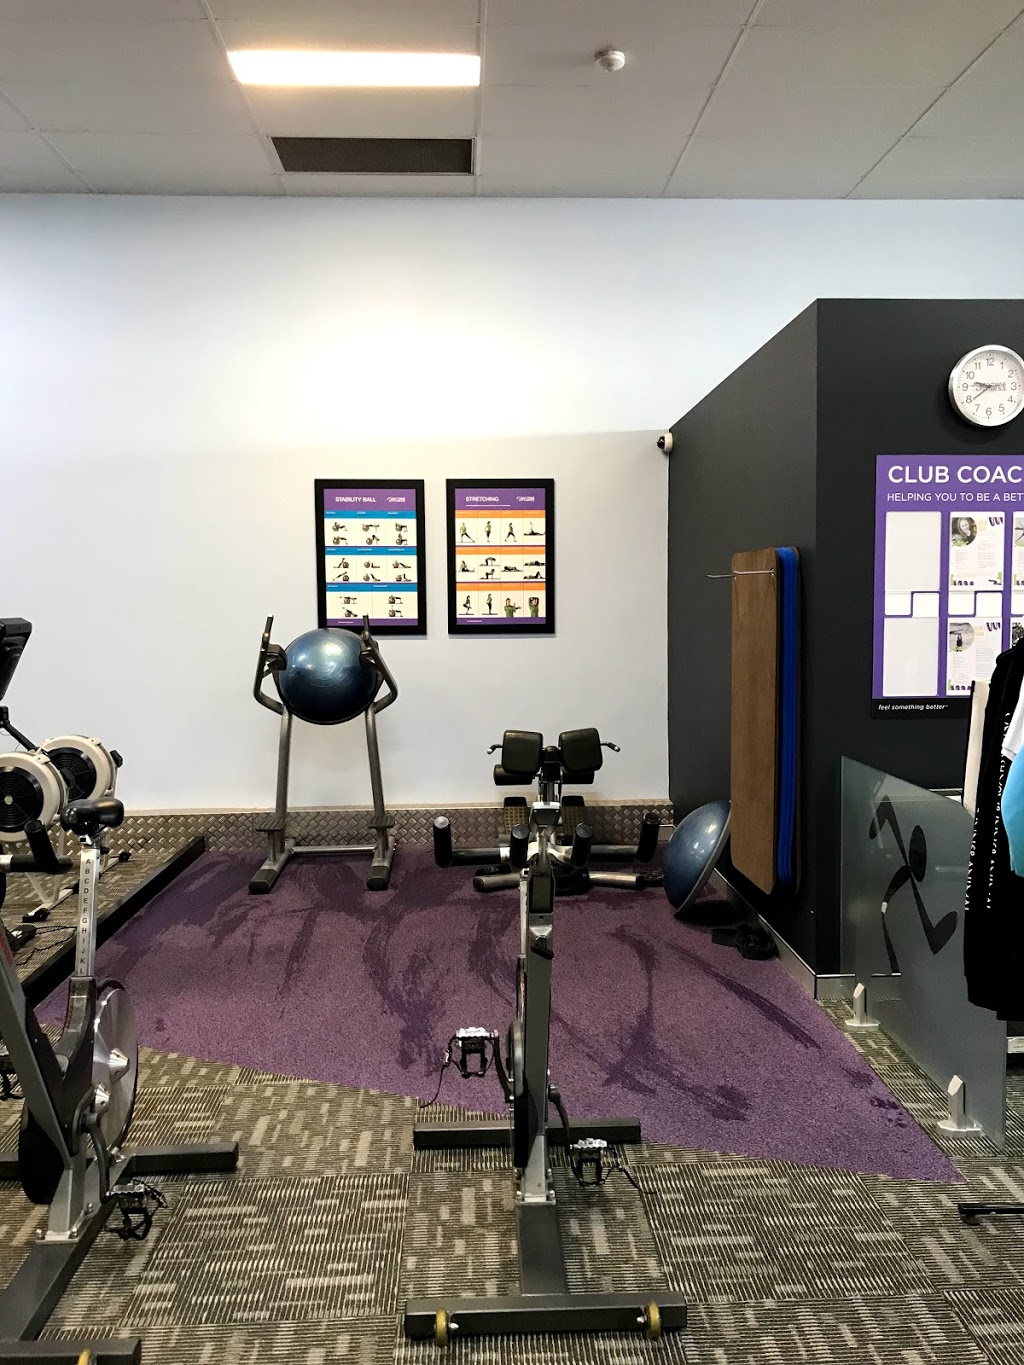 Anytime Fitness | gym | 5 Pacific Hwy, Gateshead NSW 2290, Australia | 0249431910 OR +61 2 4943 1910